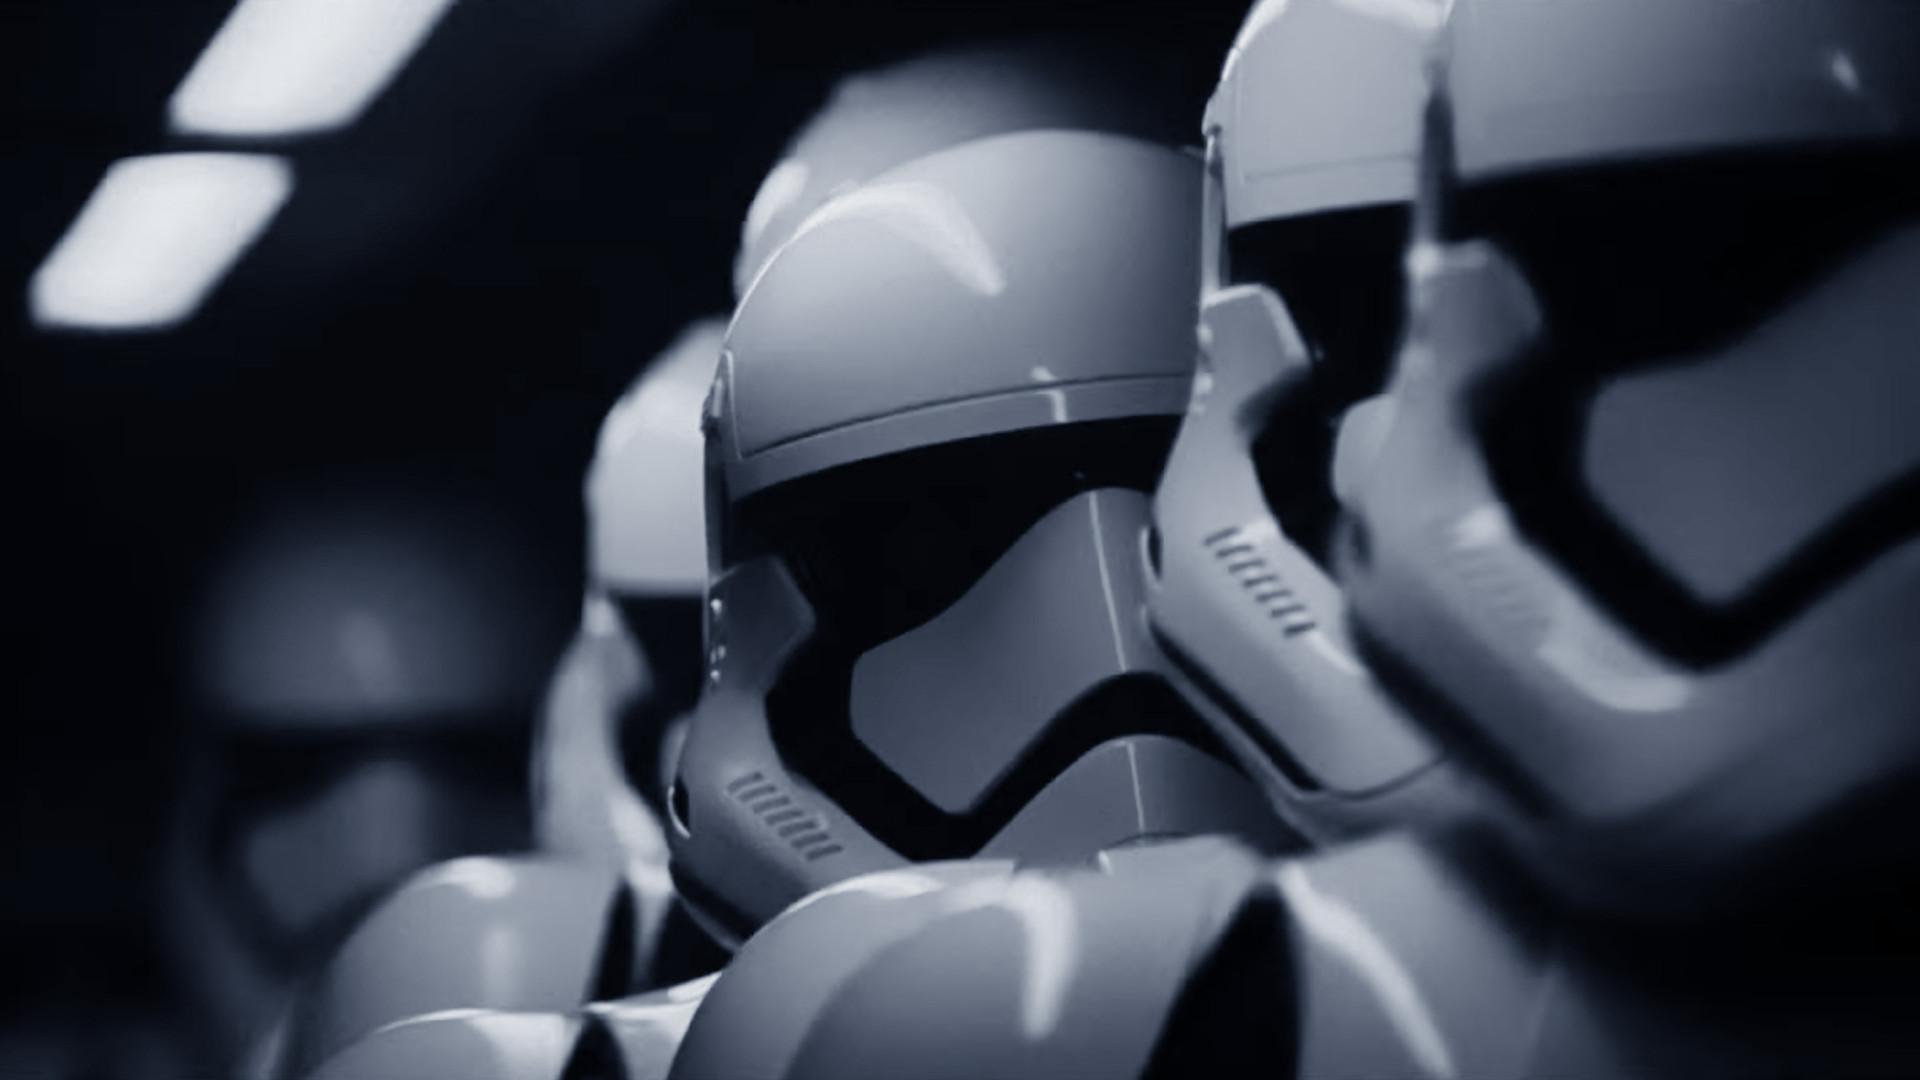 New Troopers [1920x1080]